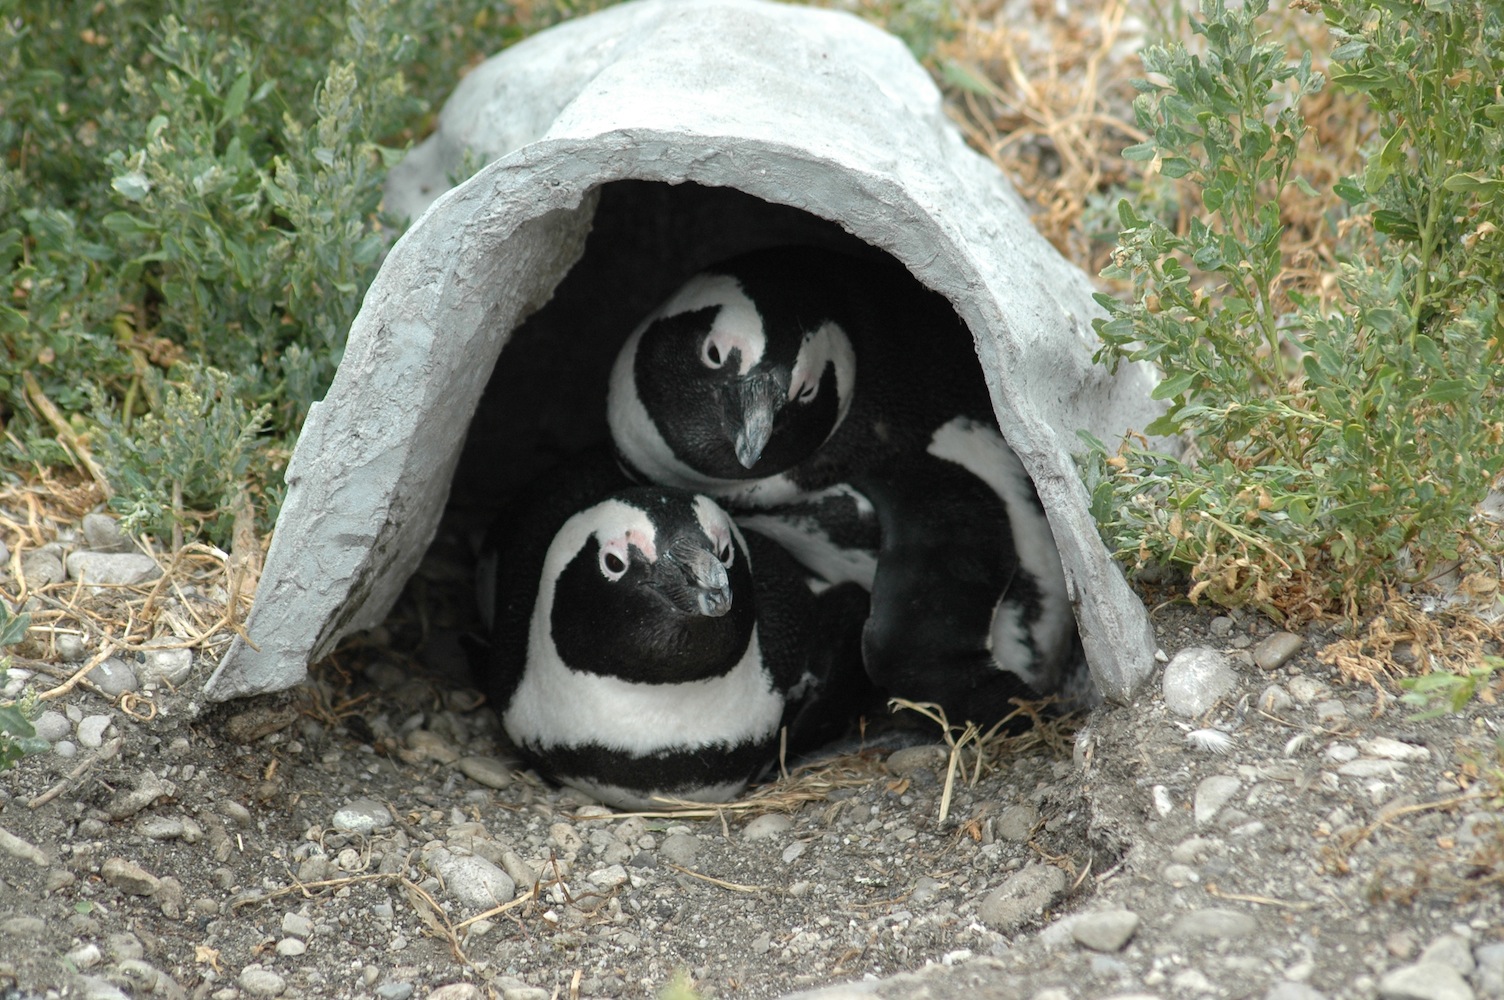 Two Penguins in a nest